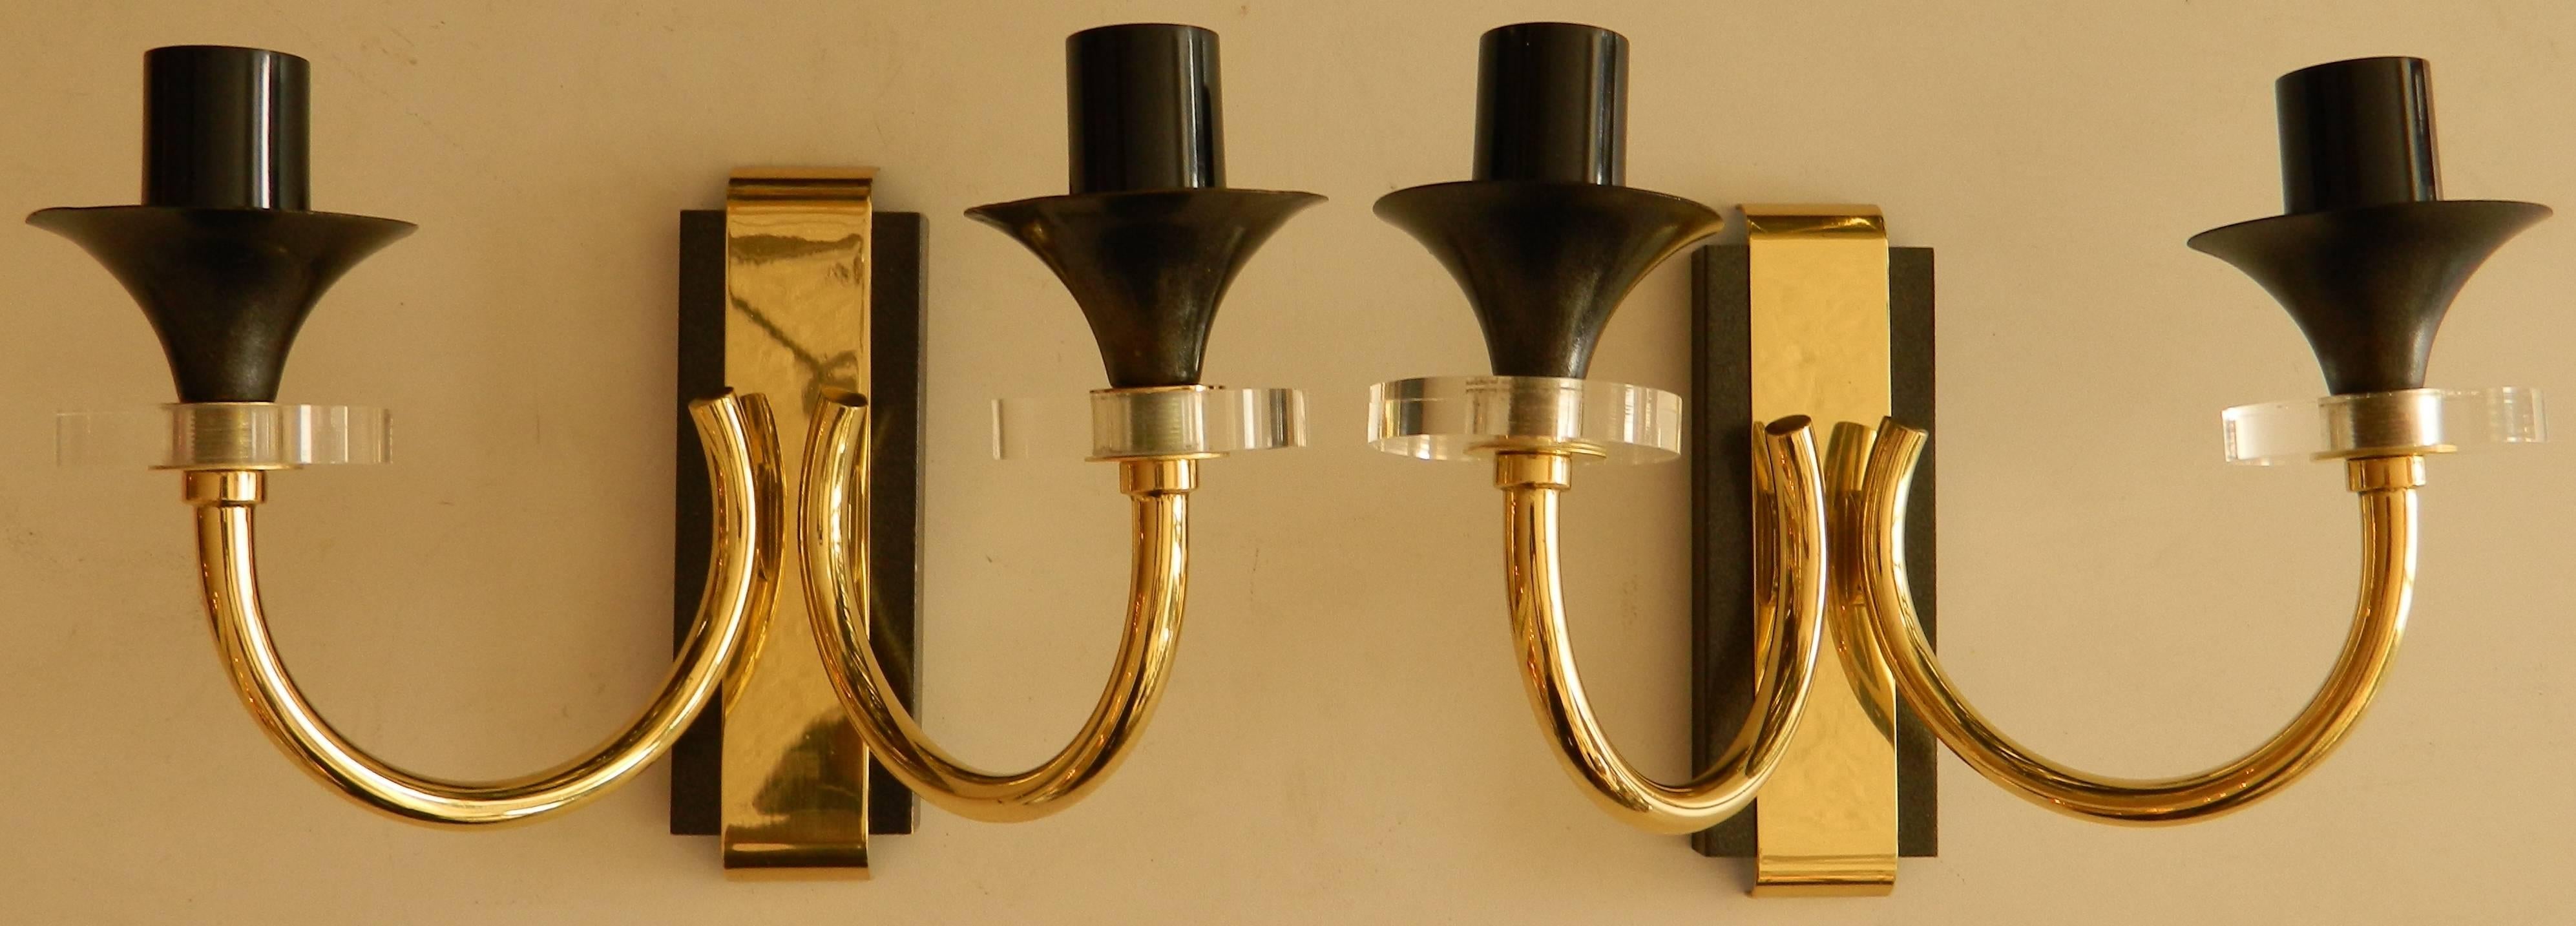 Maison Jansen style Sconces, Wall Lights Brass & Lucite mid century modern Pair  In Good Condition For Sale In Miami, FL